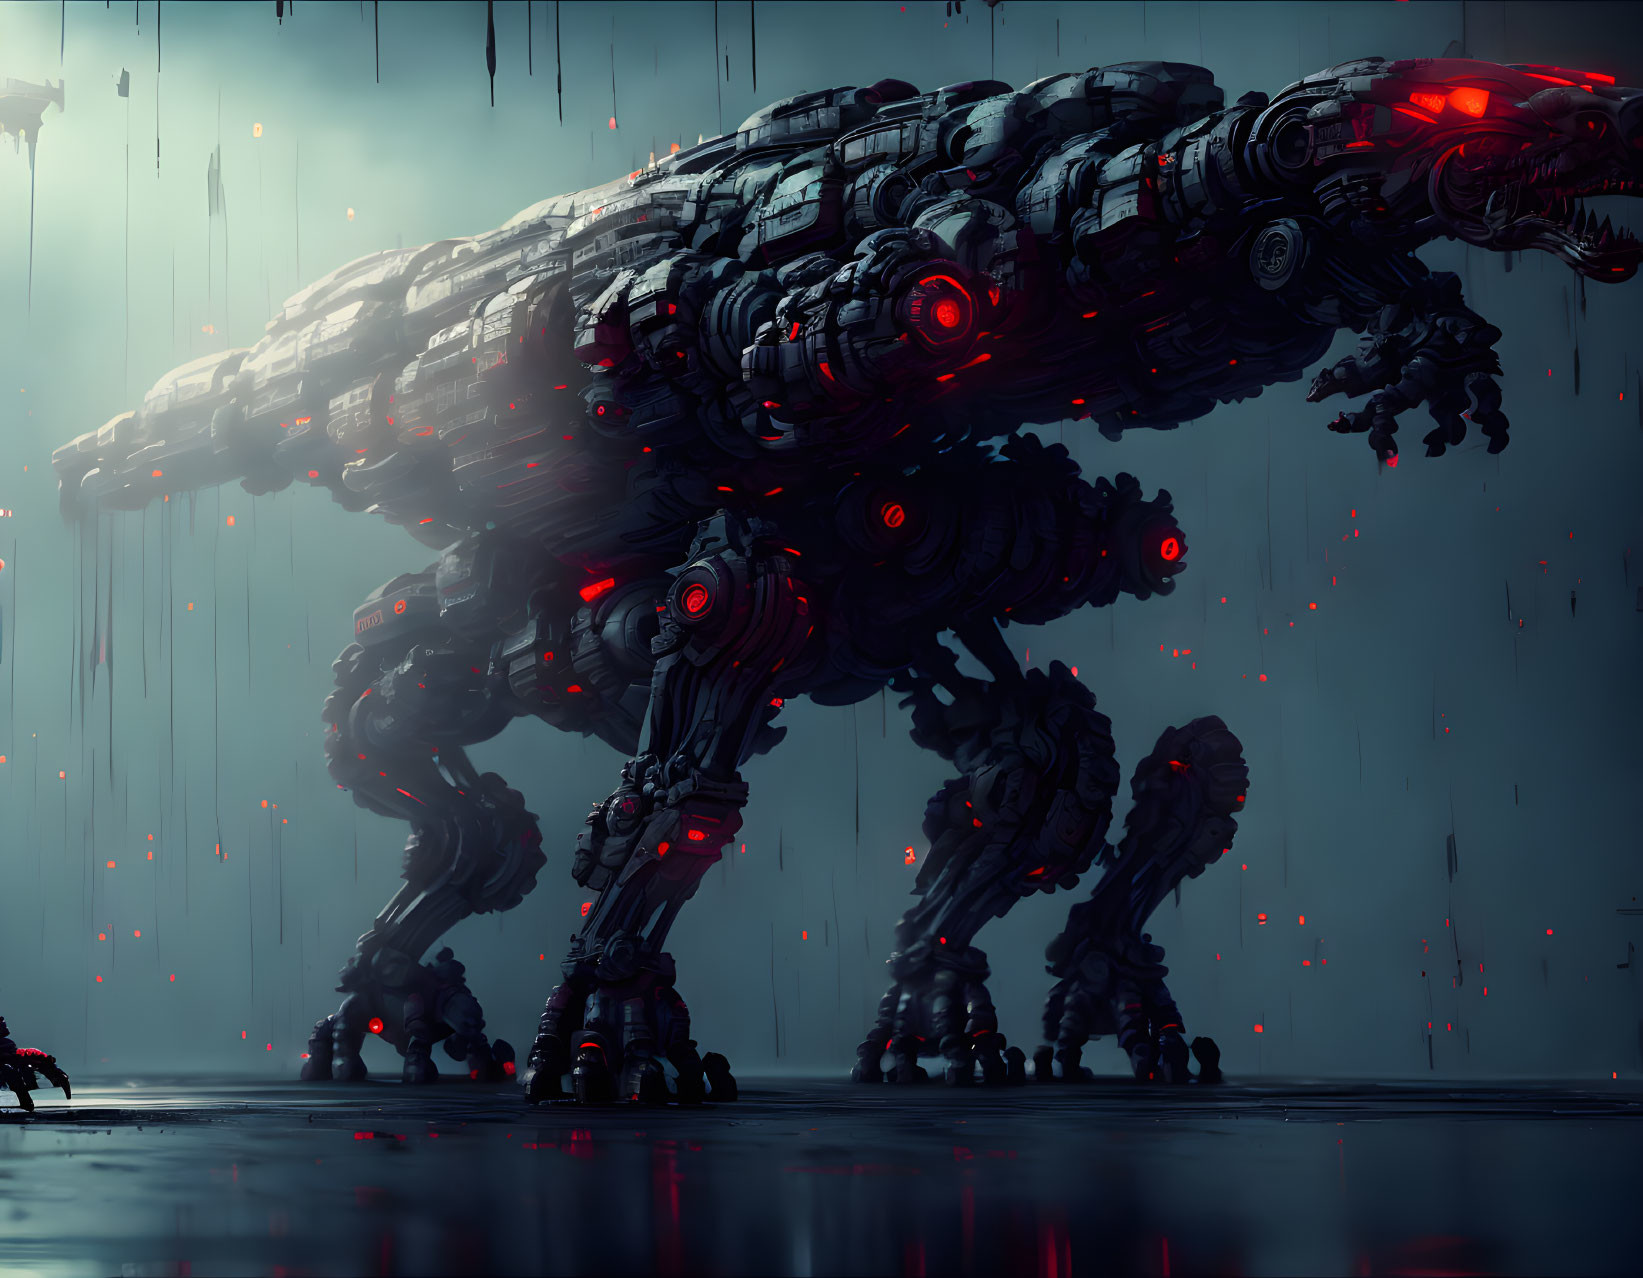 Large mechanical panther-like creature with red eyes in the rain